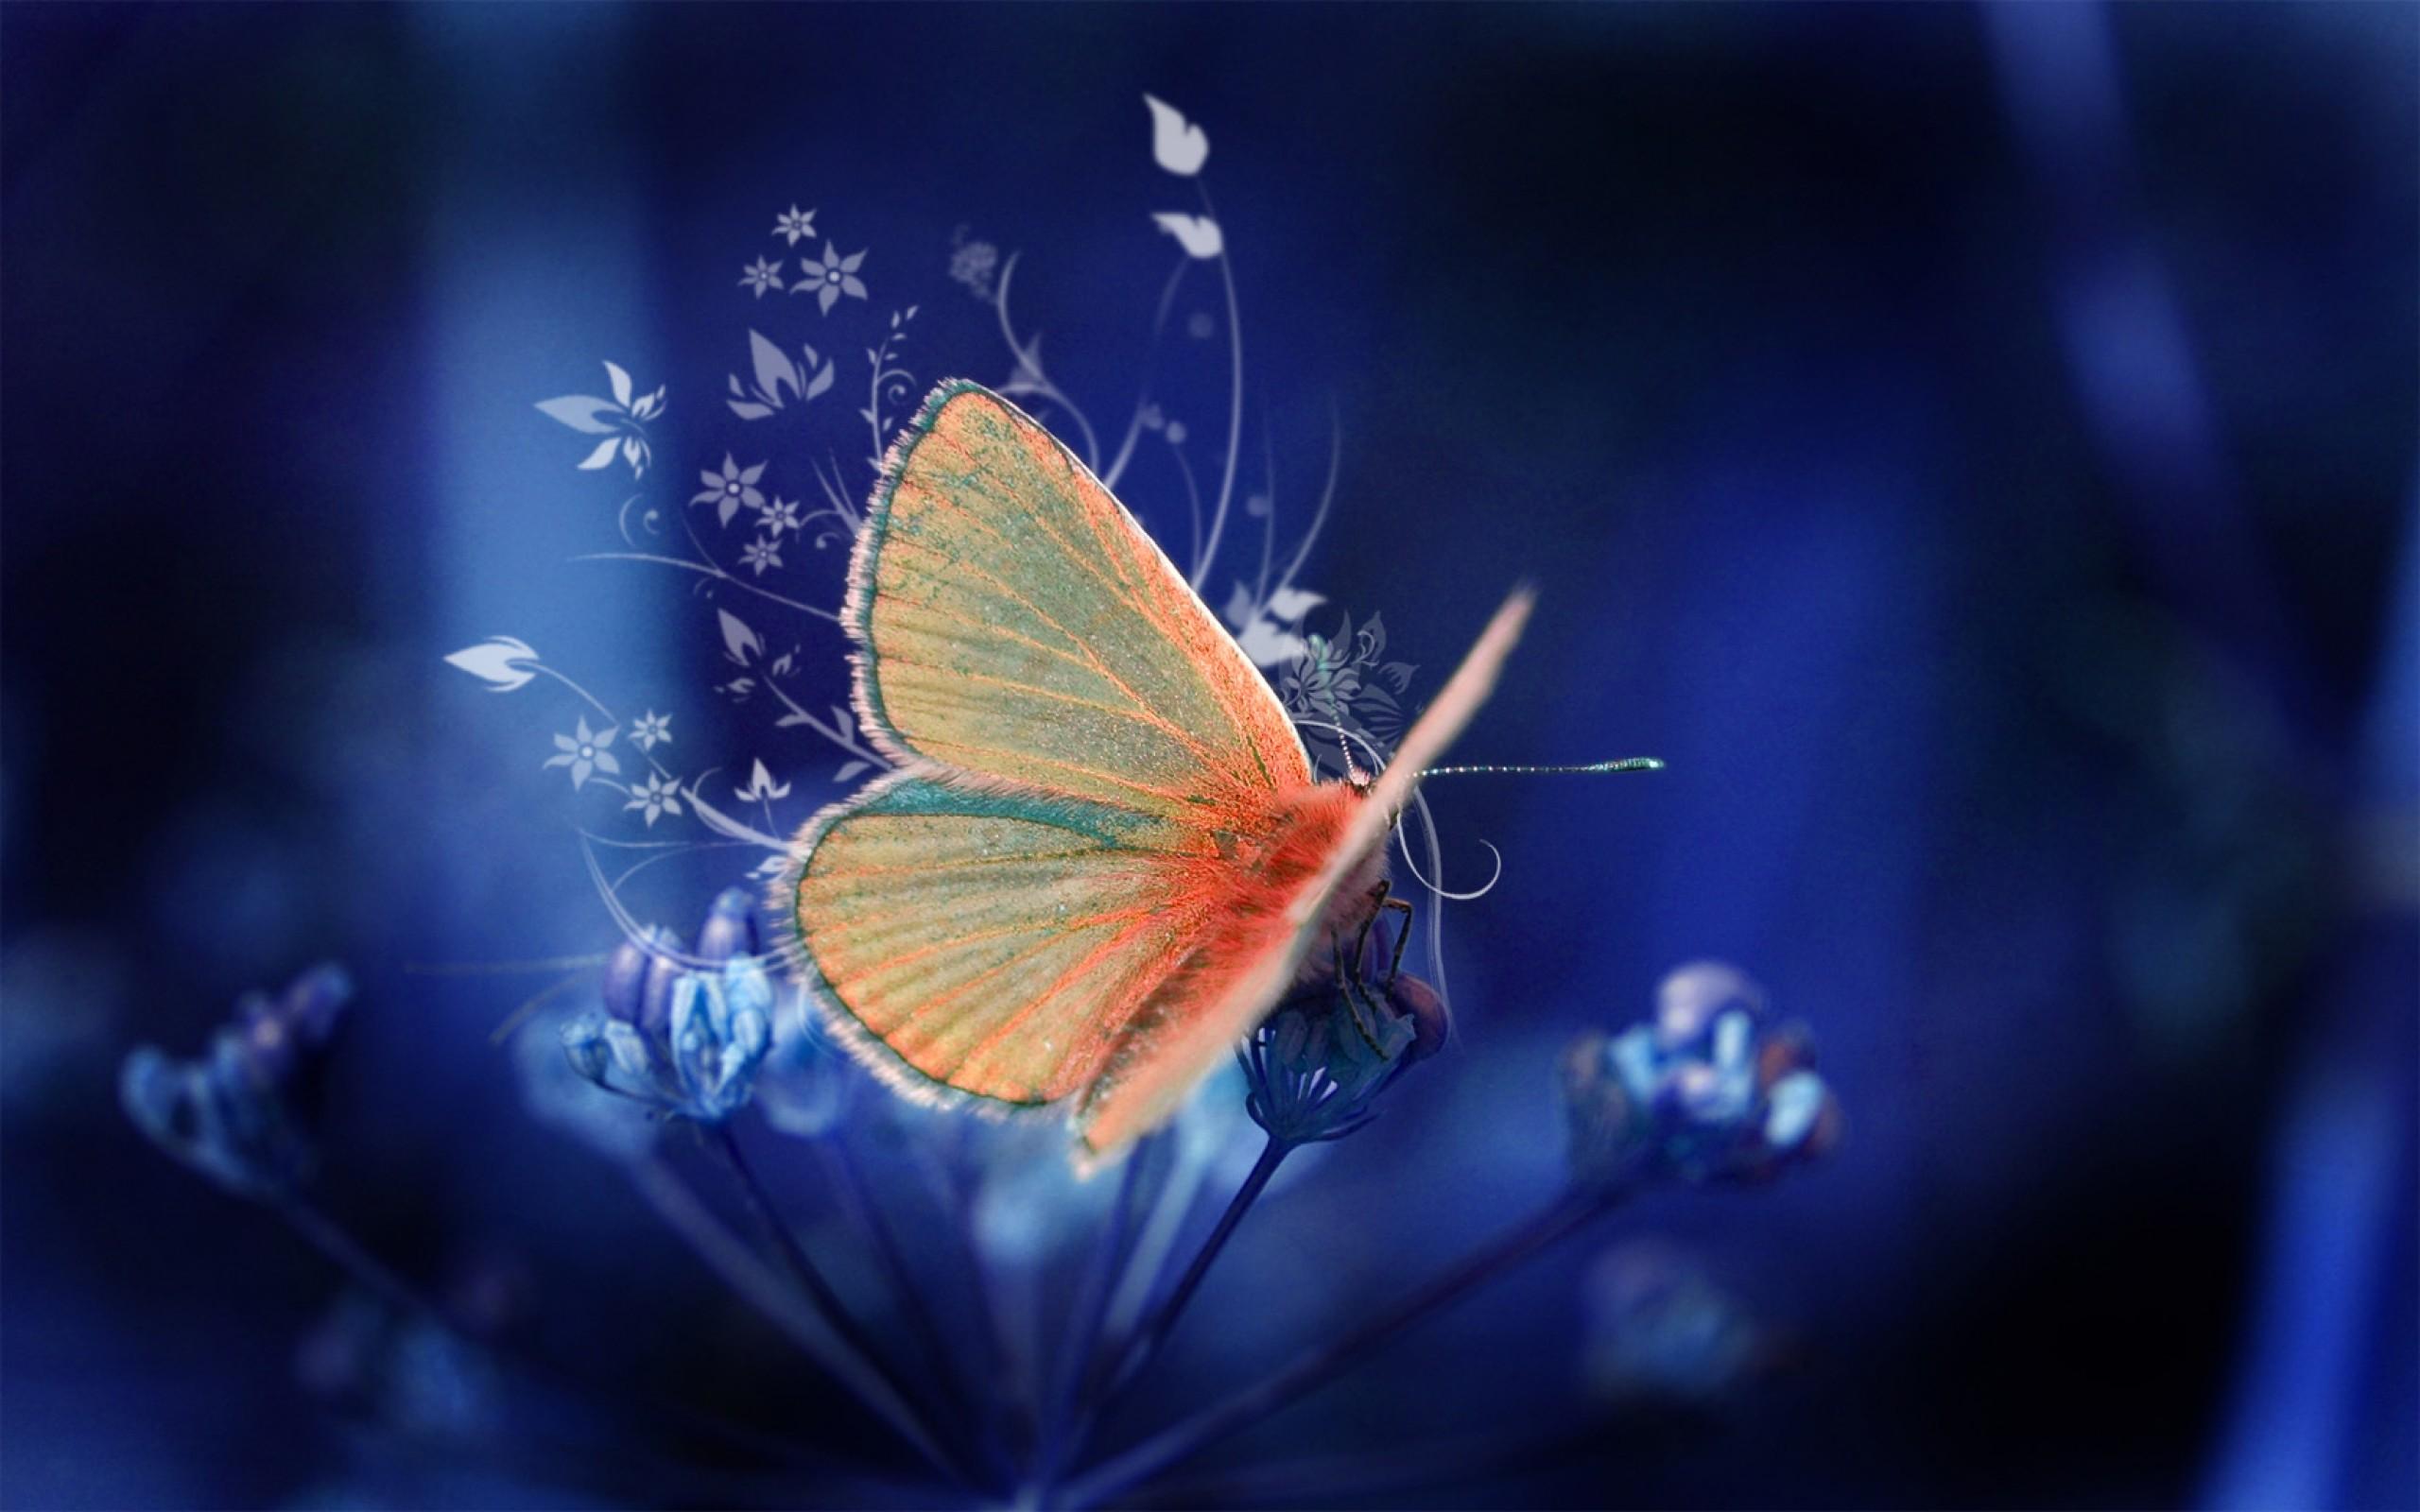 Butterfly With Flowers Wallpaper Image Of Flowers